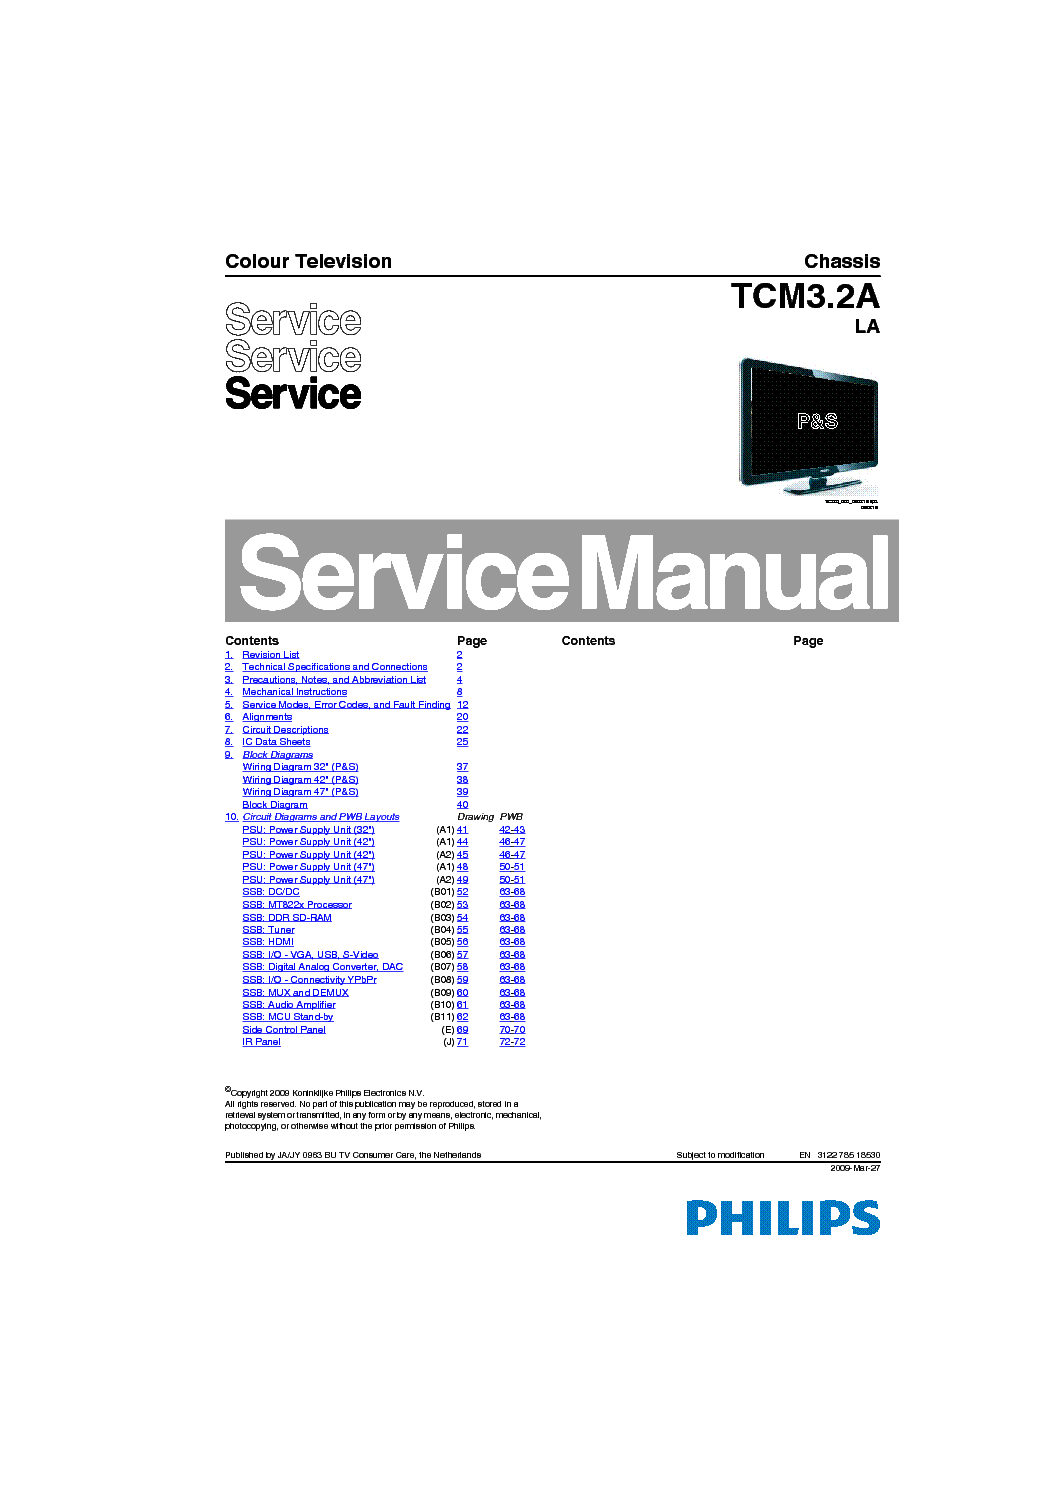 PHILIPS CHASSIS TCM3.2A-LA service manual (1st page)